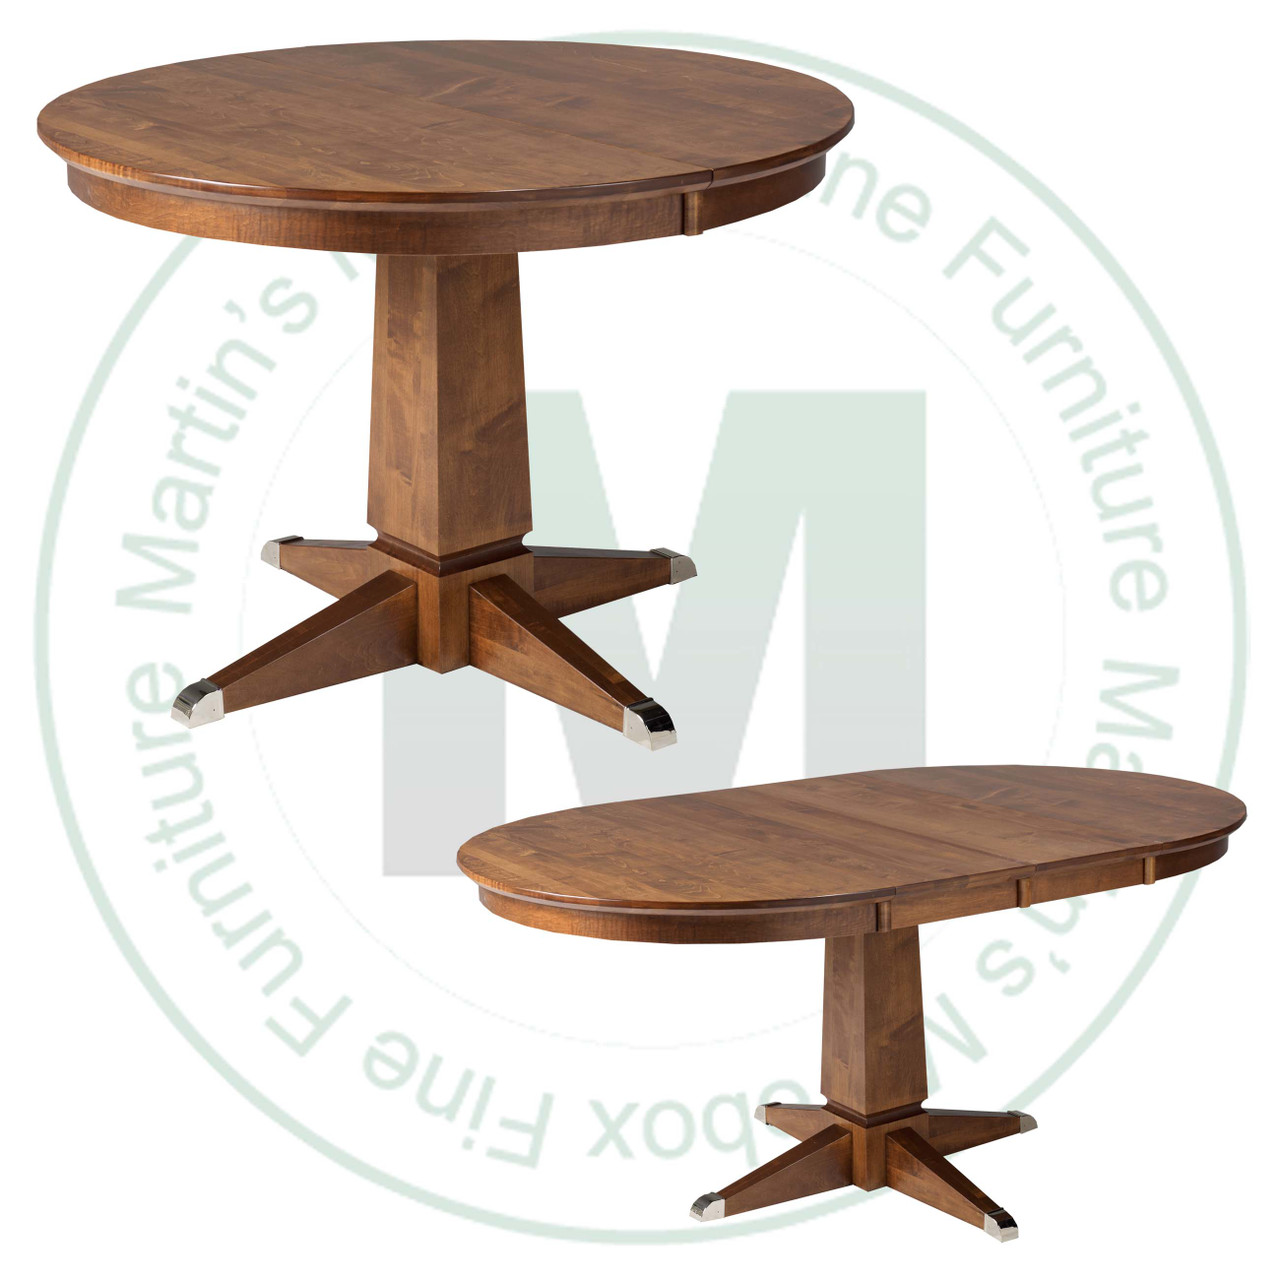 Wormy Maple Danish Single Pedestal Table 36''D x 42''W x 30''H With 2 - 12'' Leaves